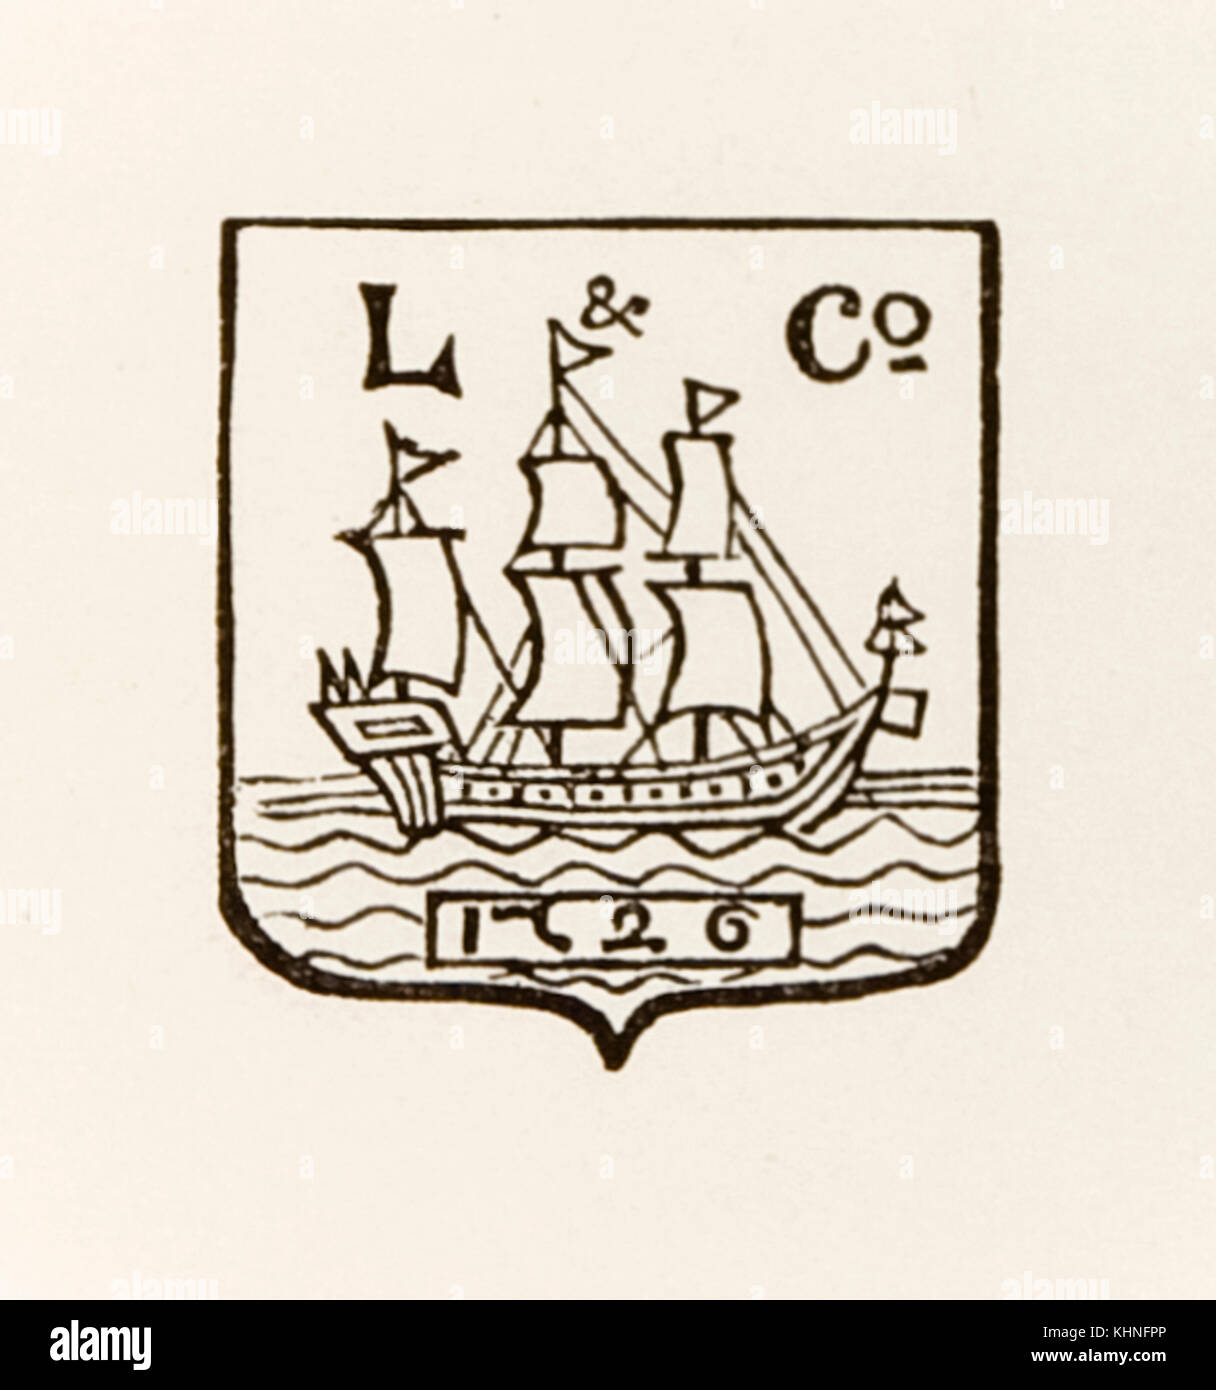 L & Co Ship 1726 logo used by Longmans Green and Company (now ‘Longmans’) as its publisher's or printer’s device from around 1880. The ship was chosen as the company’s founder Thomas Longman purchased an existing publishing house and began operating out of a shop called ‘The Ship’ in Paternoster Road in 1726. See more information below. Stock Photo